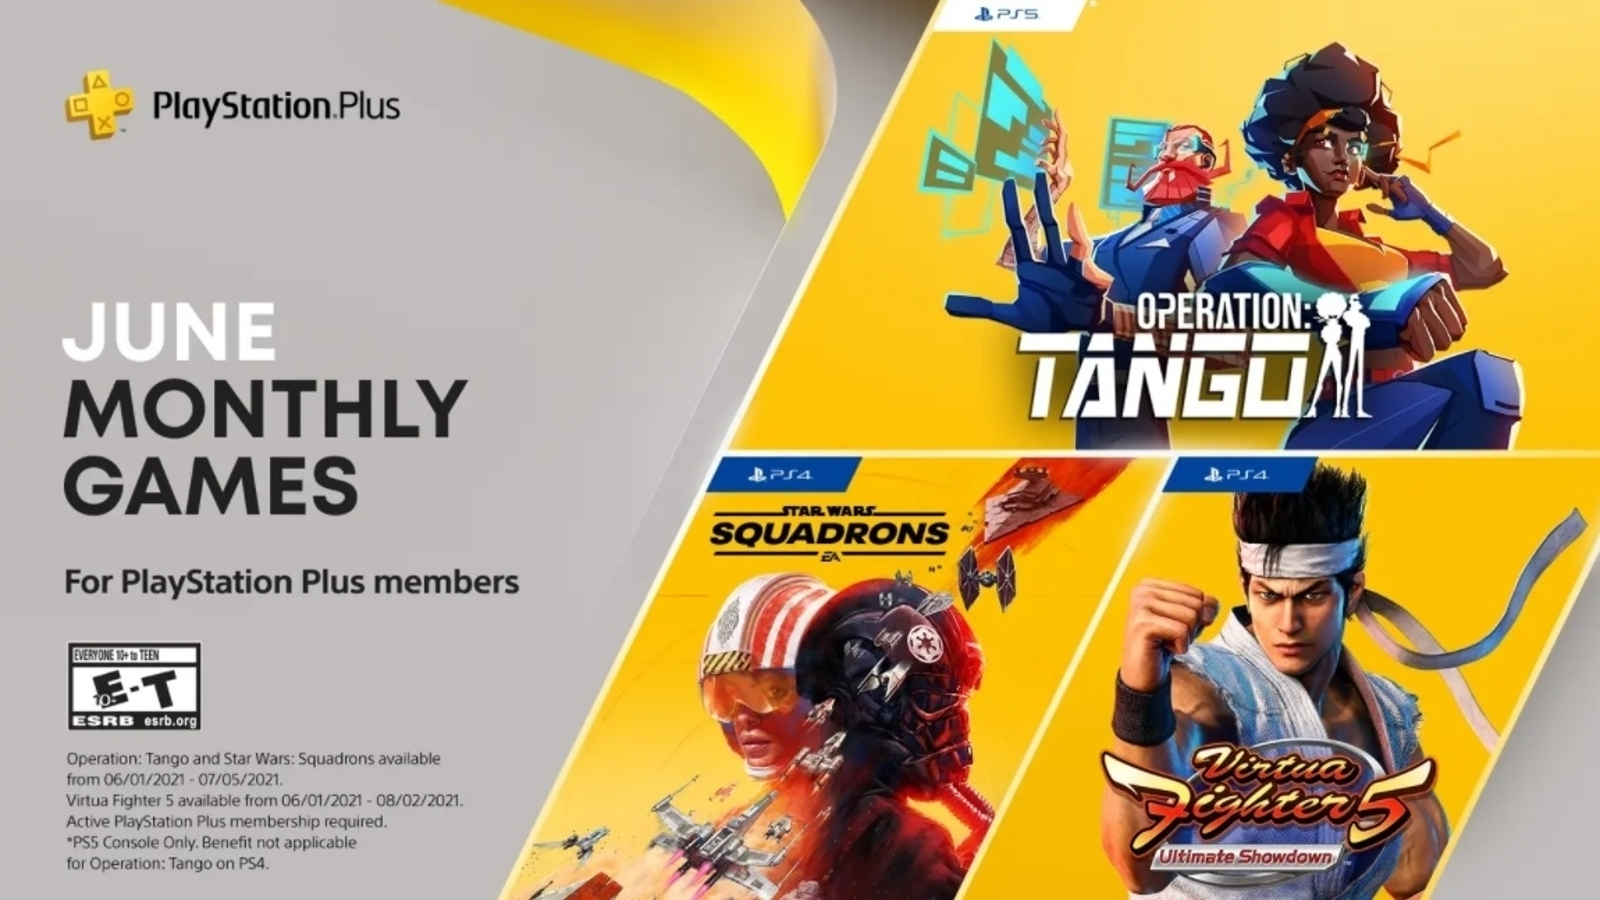 PlayStation Plus free games for June 2019 announced - Polygon